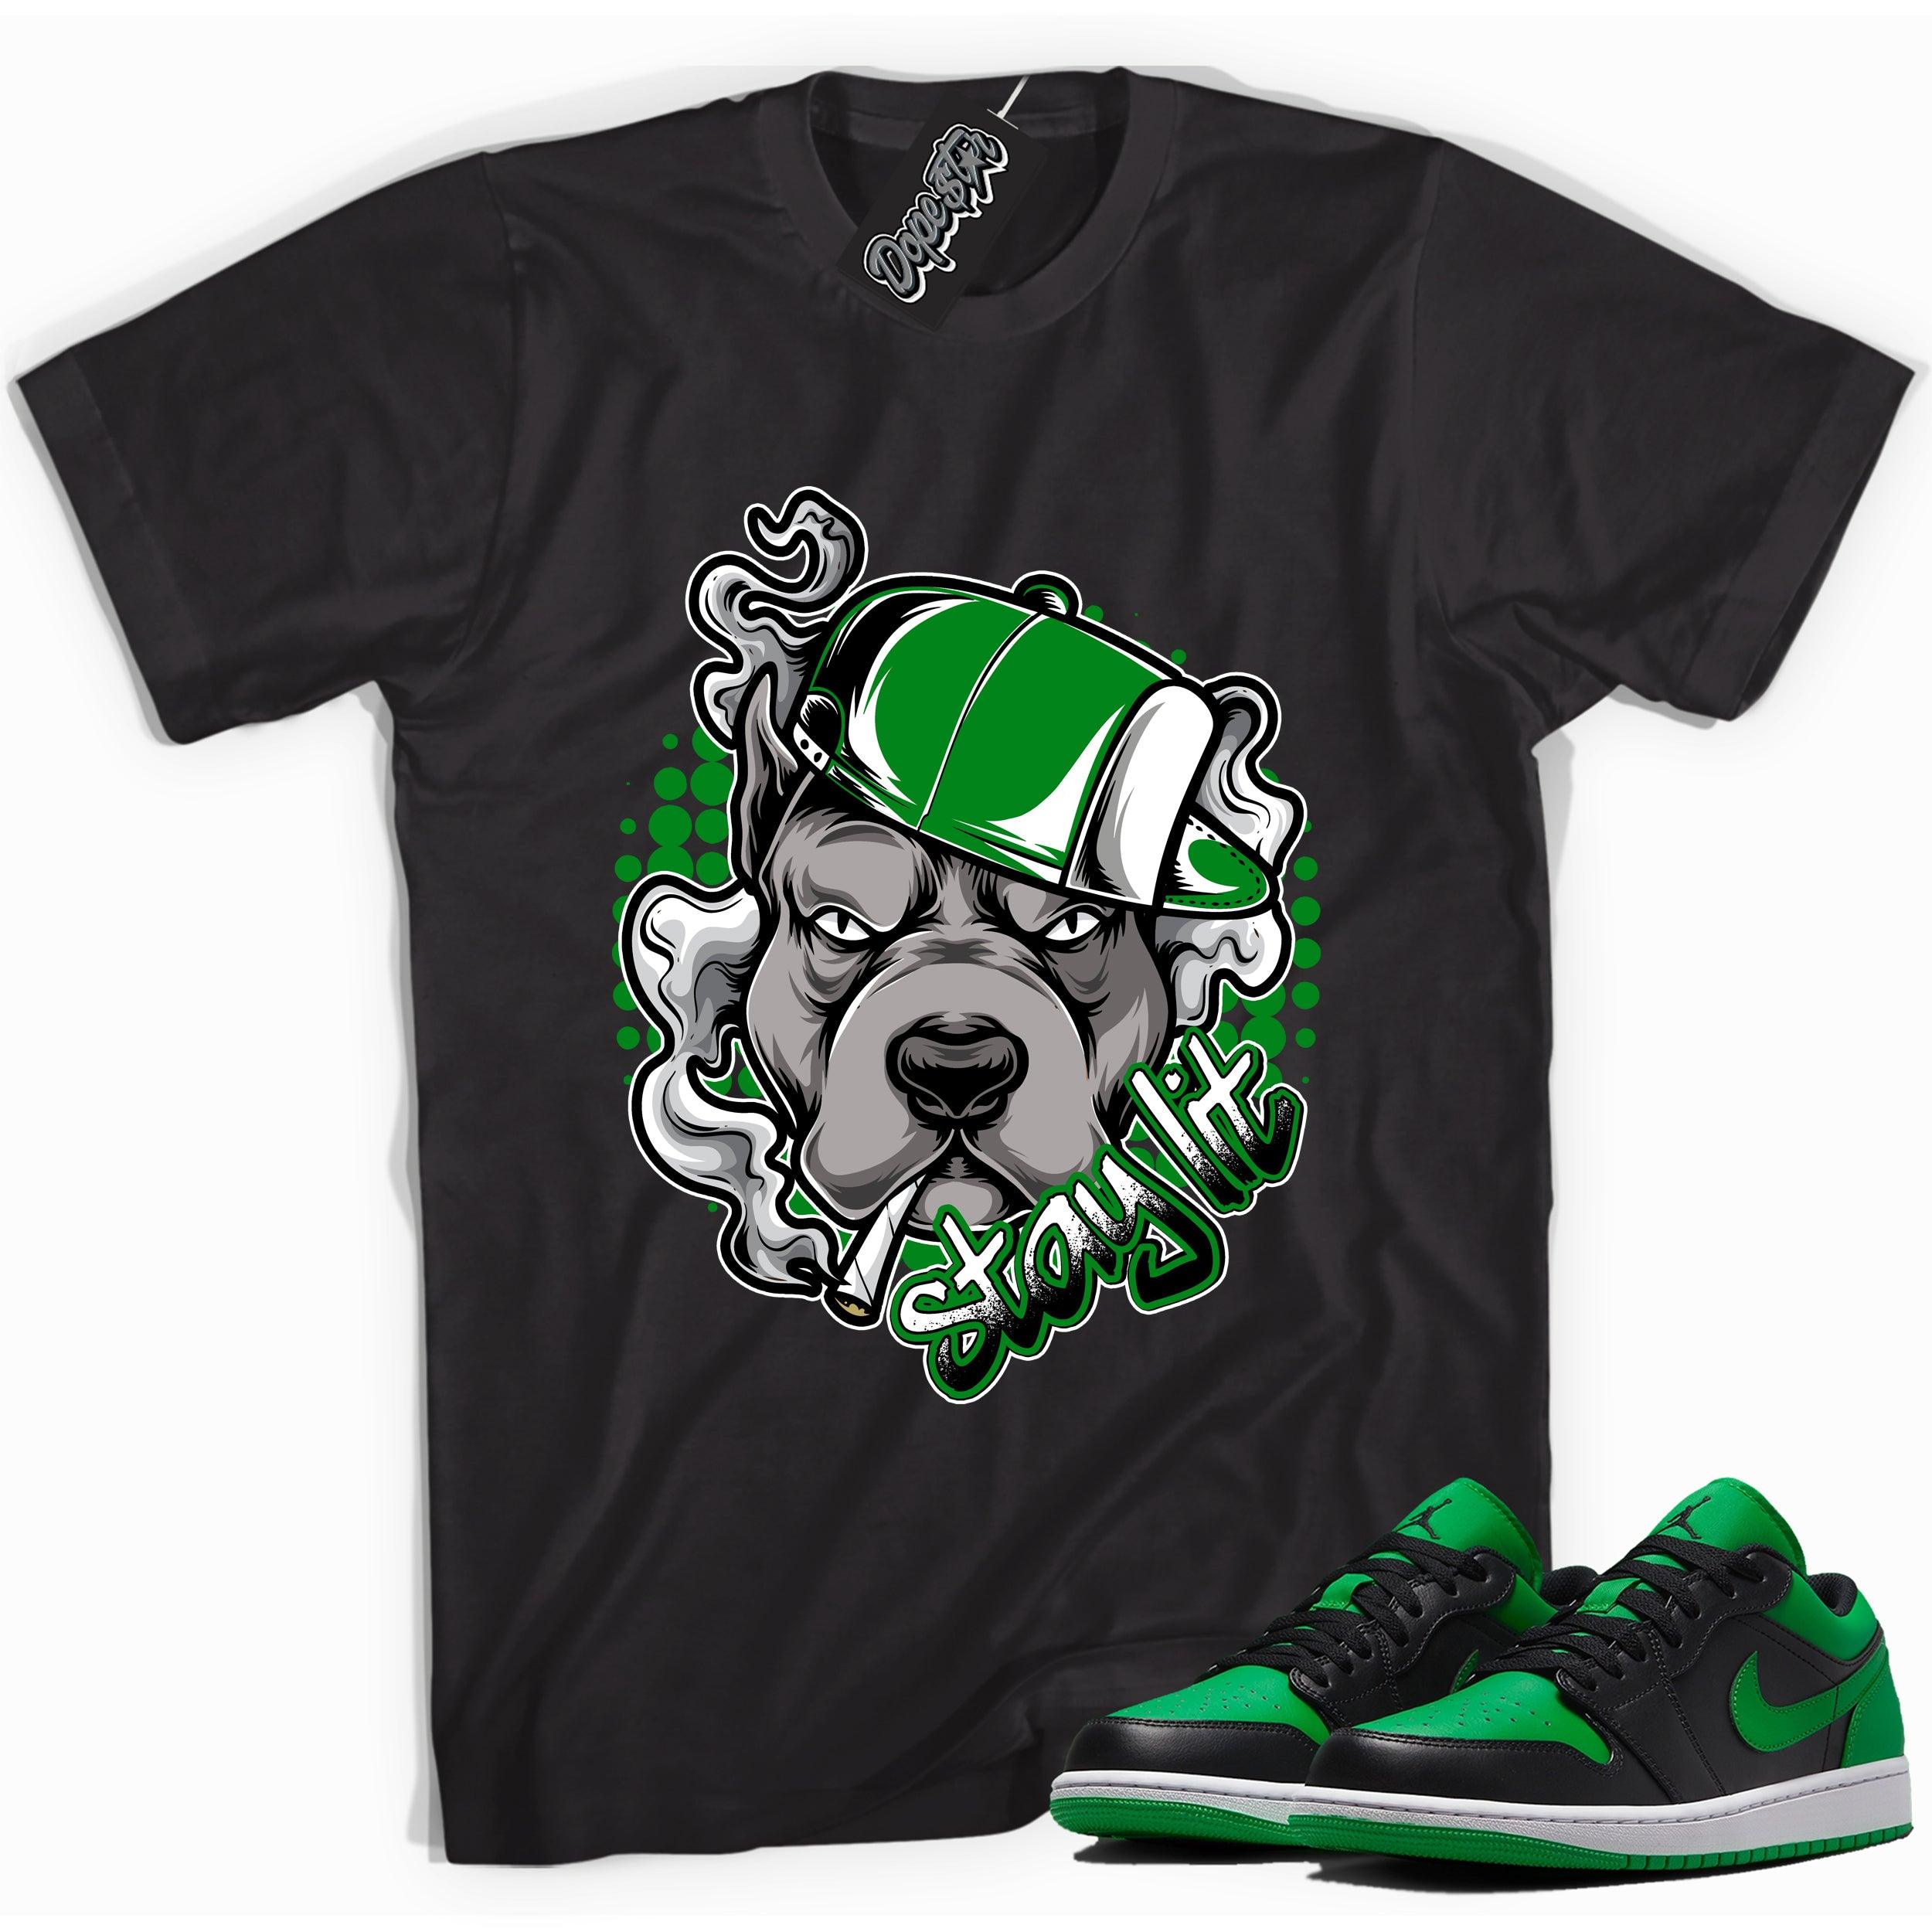 Cool black graphic tee with 'stay lit' print, that perfectly matches Air Jordan 1 Low Lucky Green sneakers